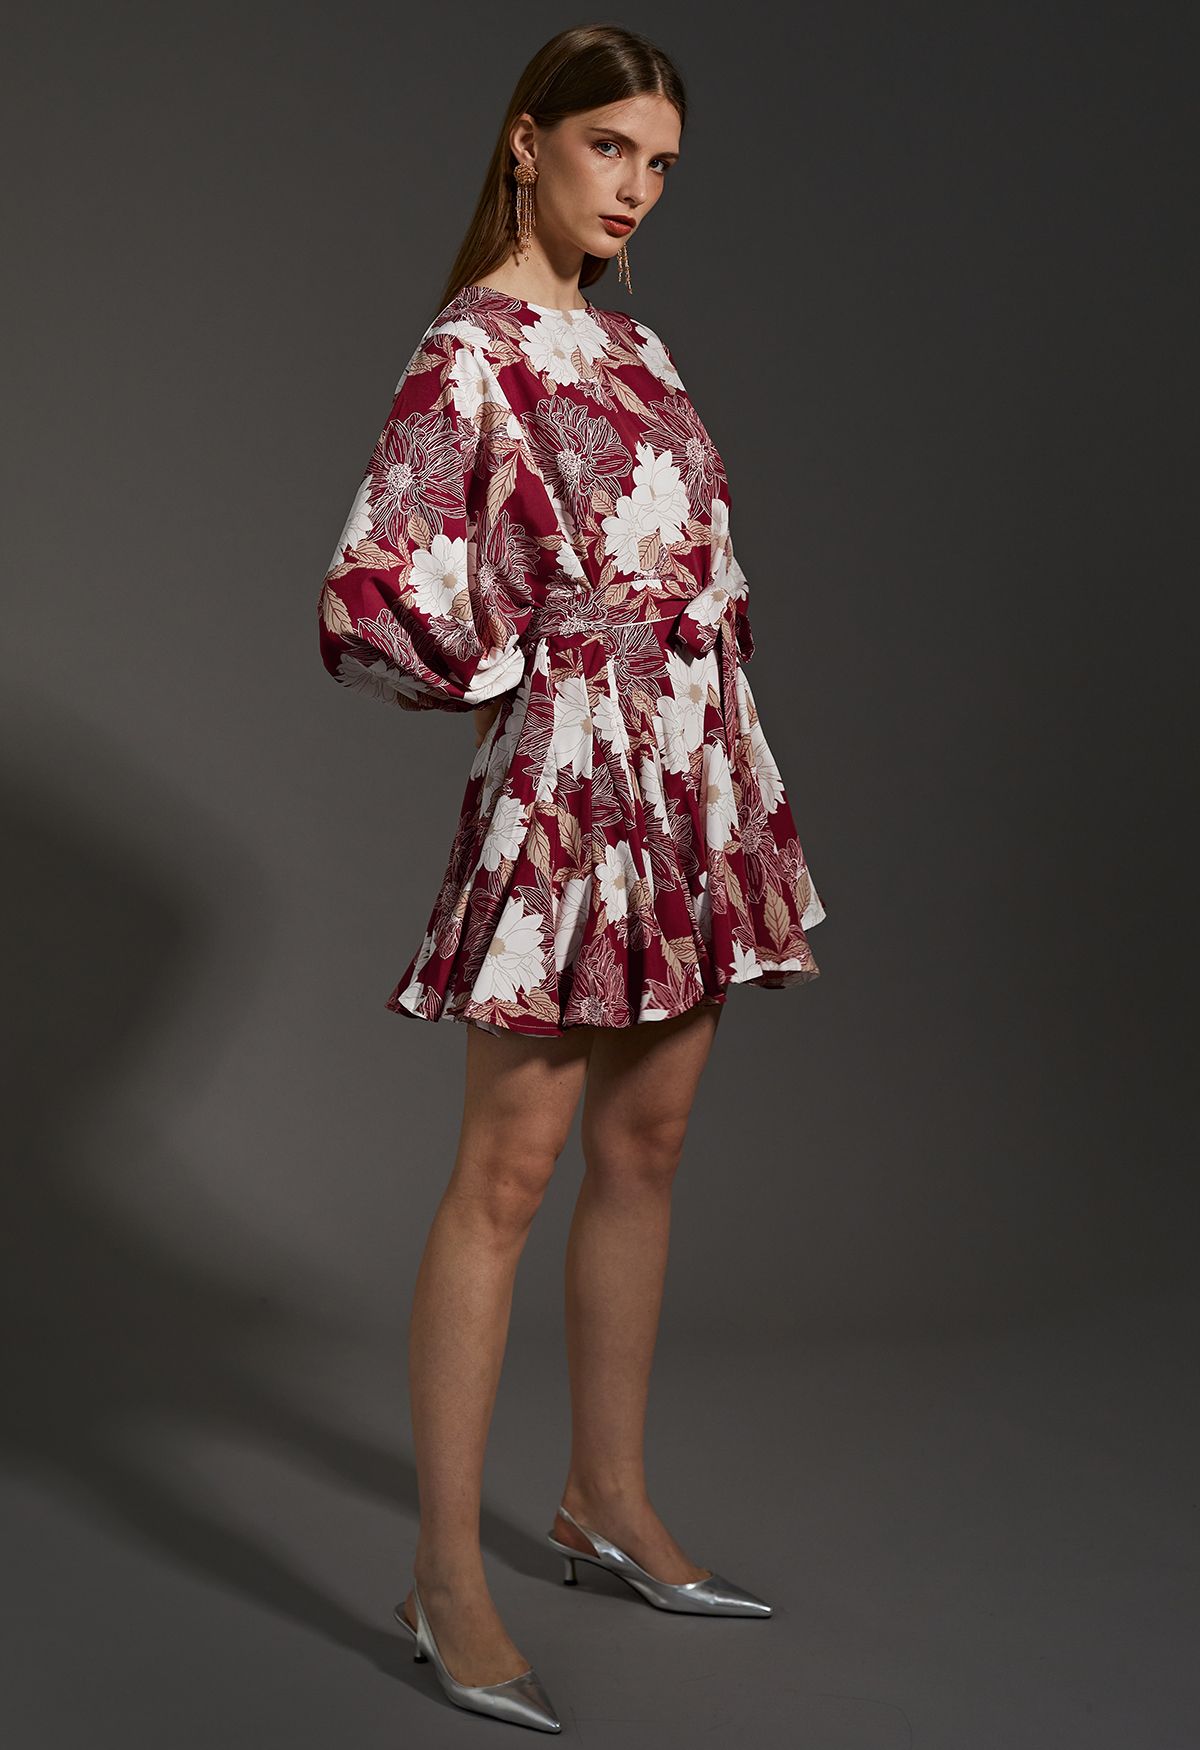 Marguerite Print Bubble Sleeves Frilling Dress in Red